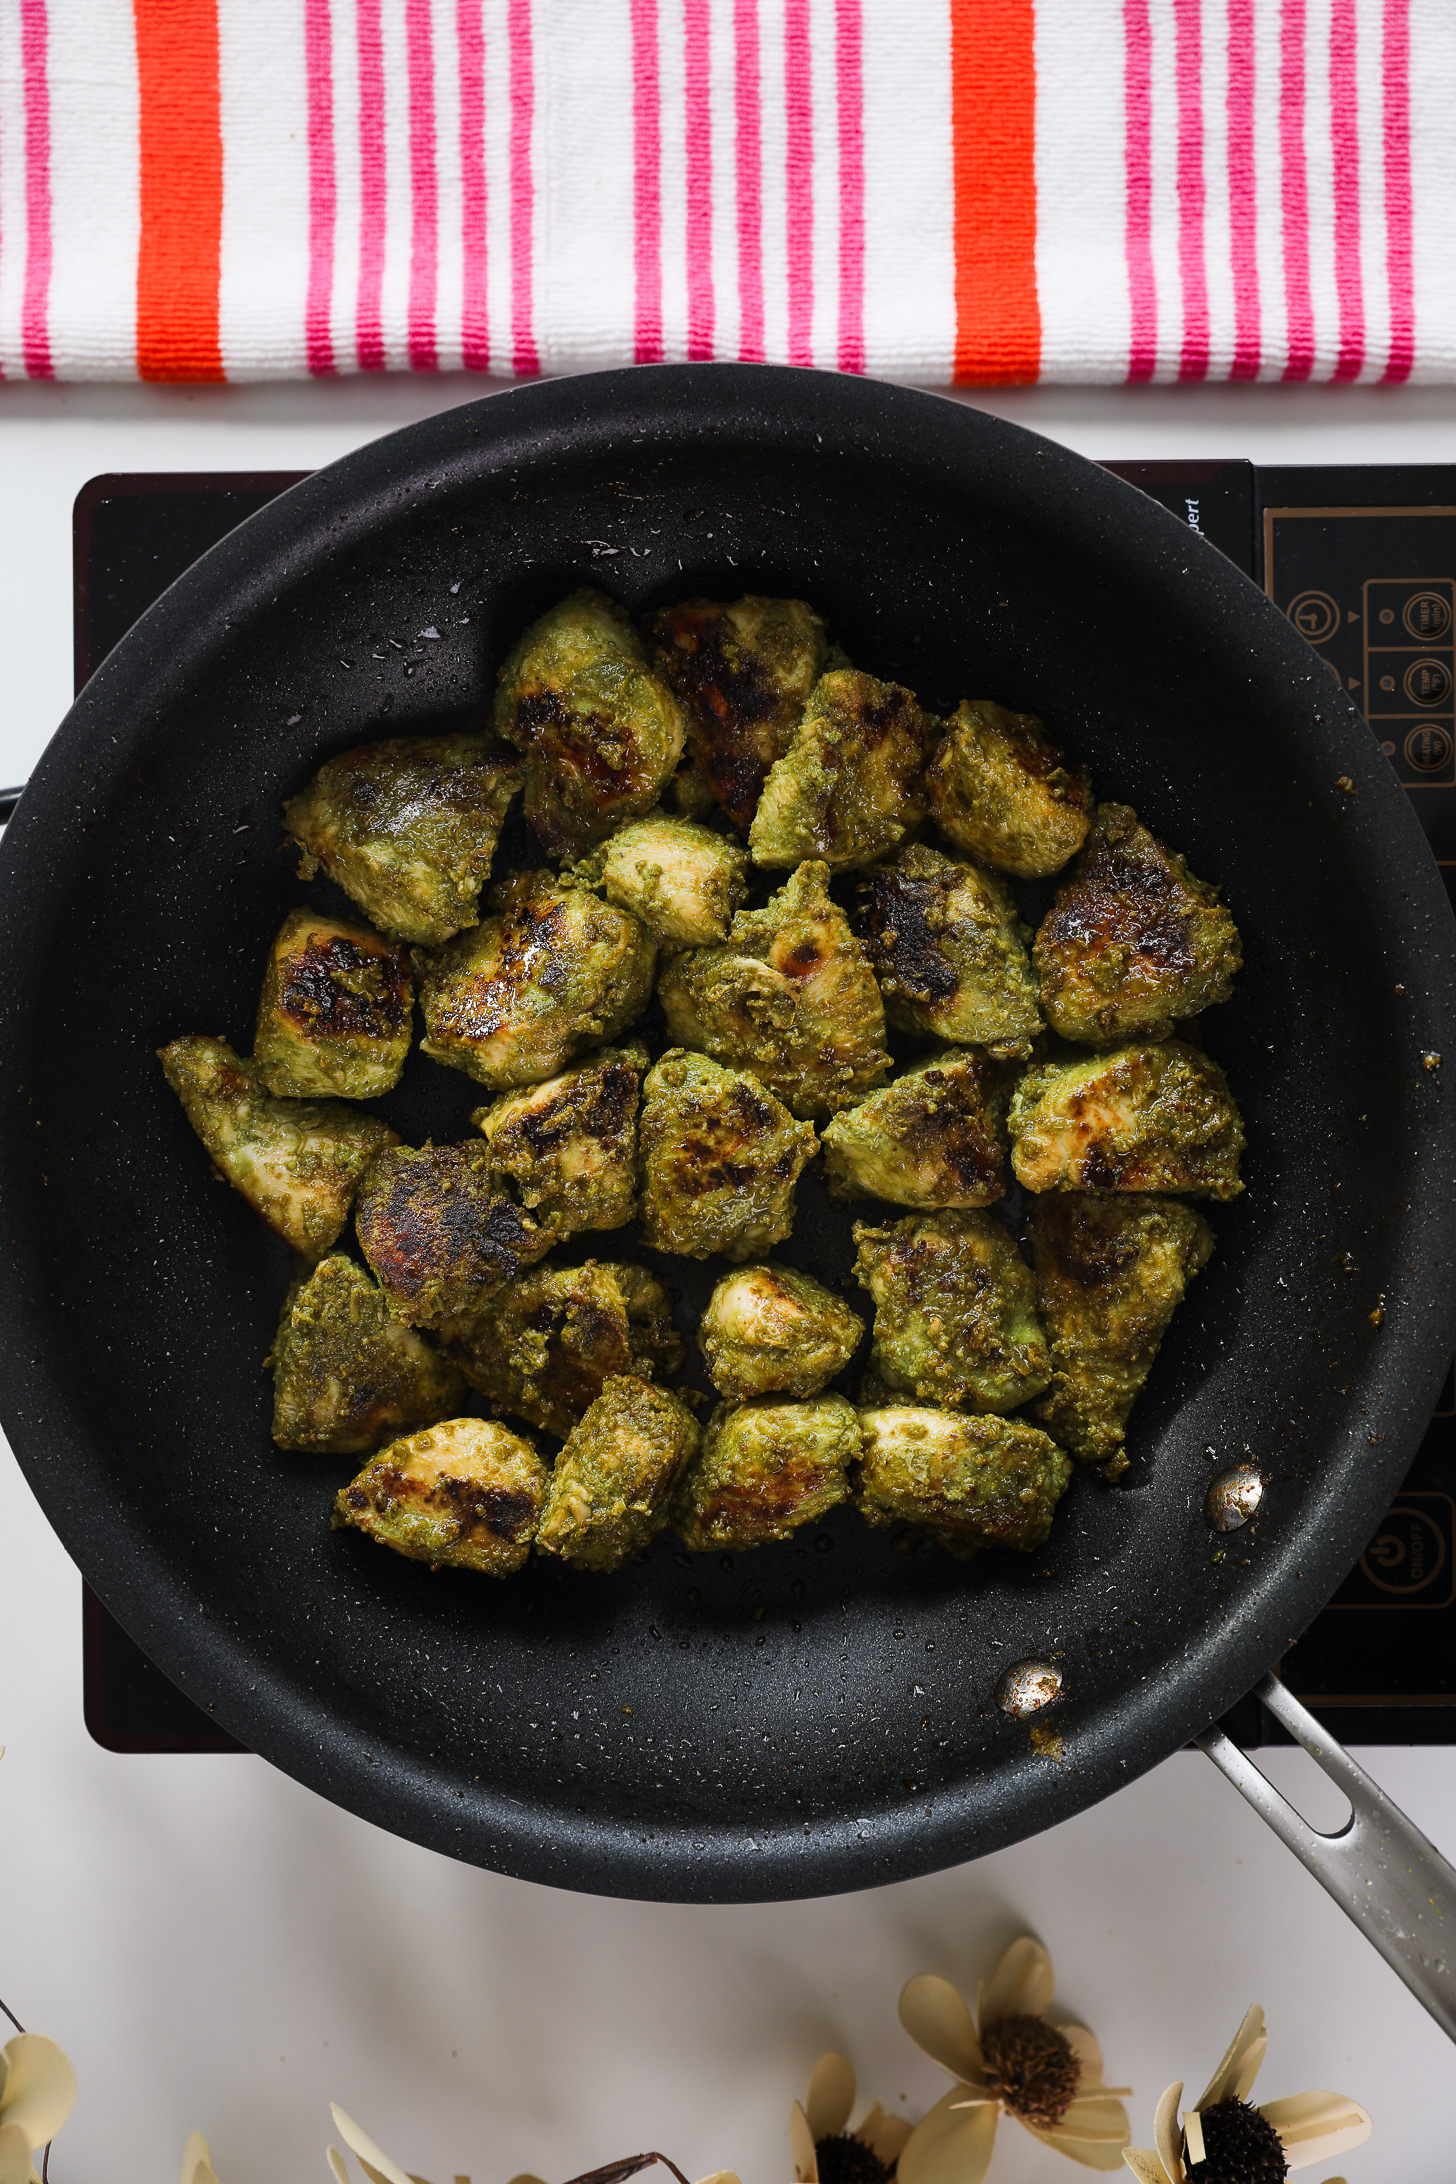 Pan of cooked and charred green masala-coated chicken breast pieces.